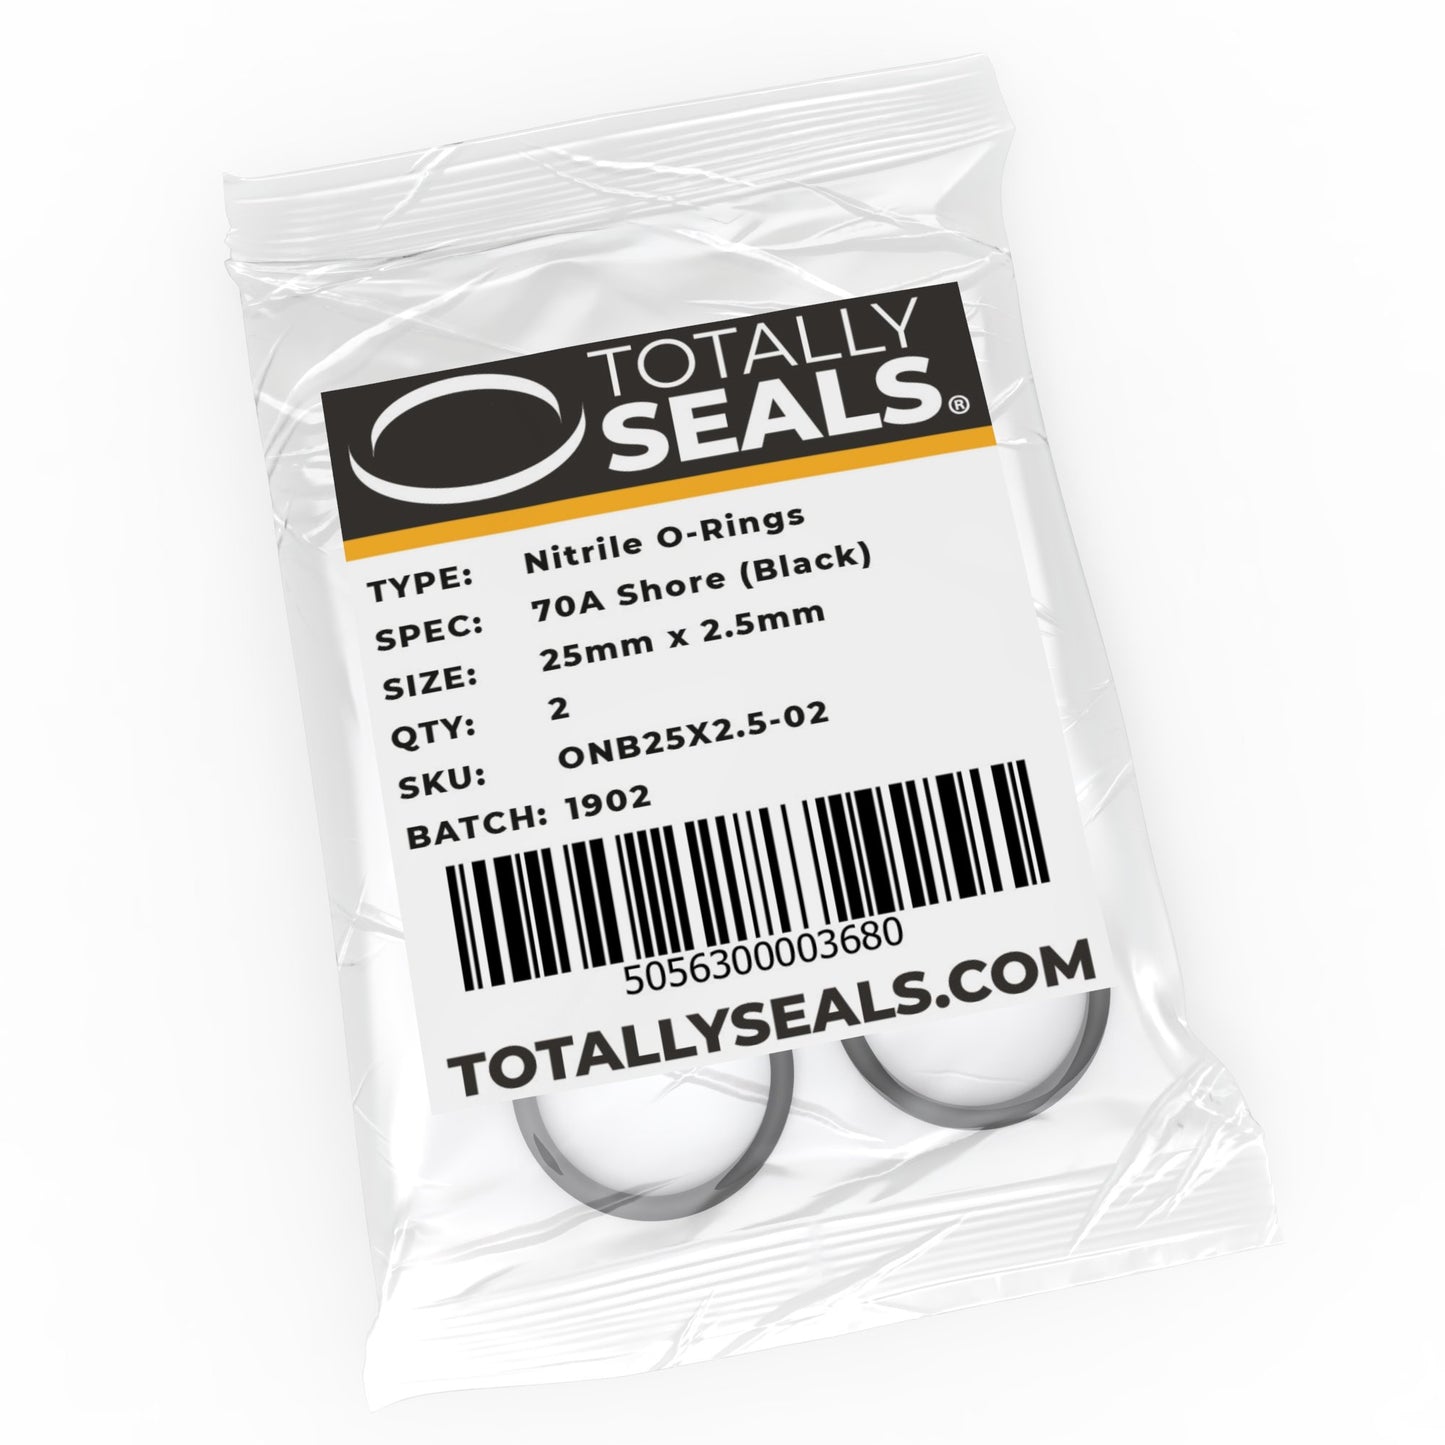 25mm x 2.5mm (30mm OD) Nitrile O-Rings - Totally Seals®